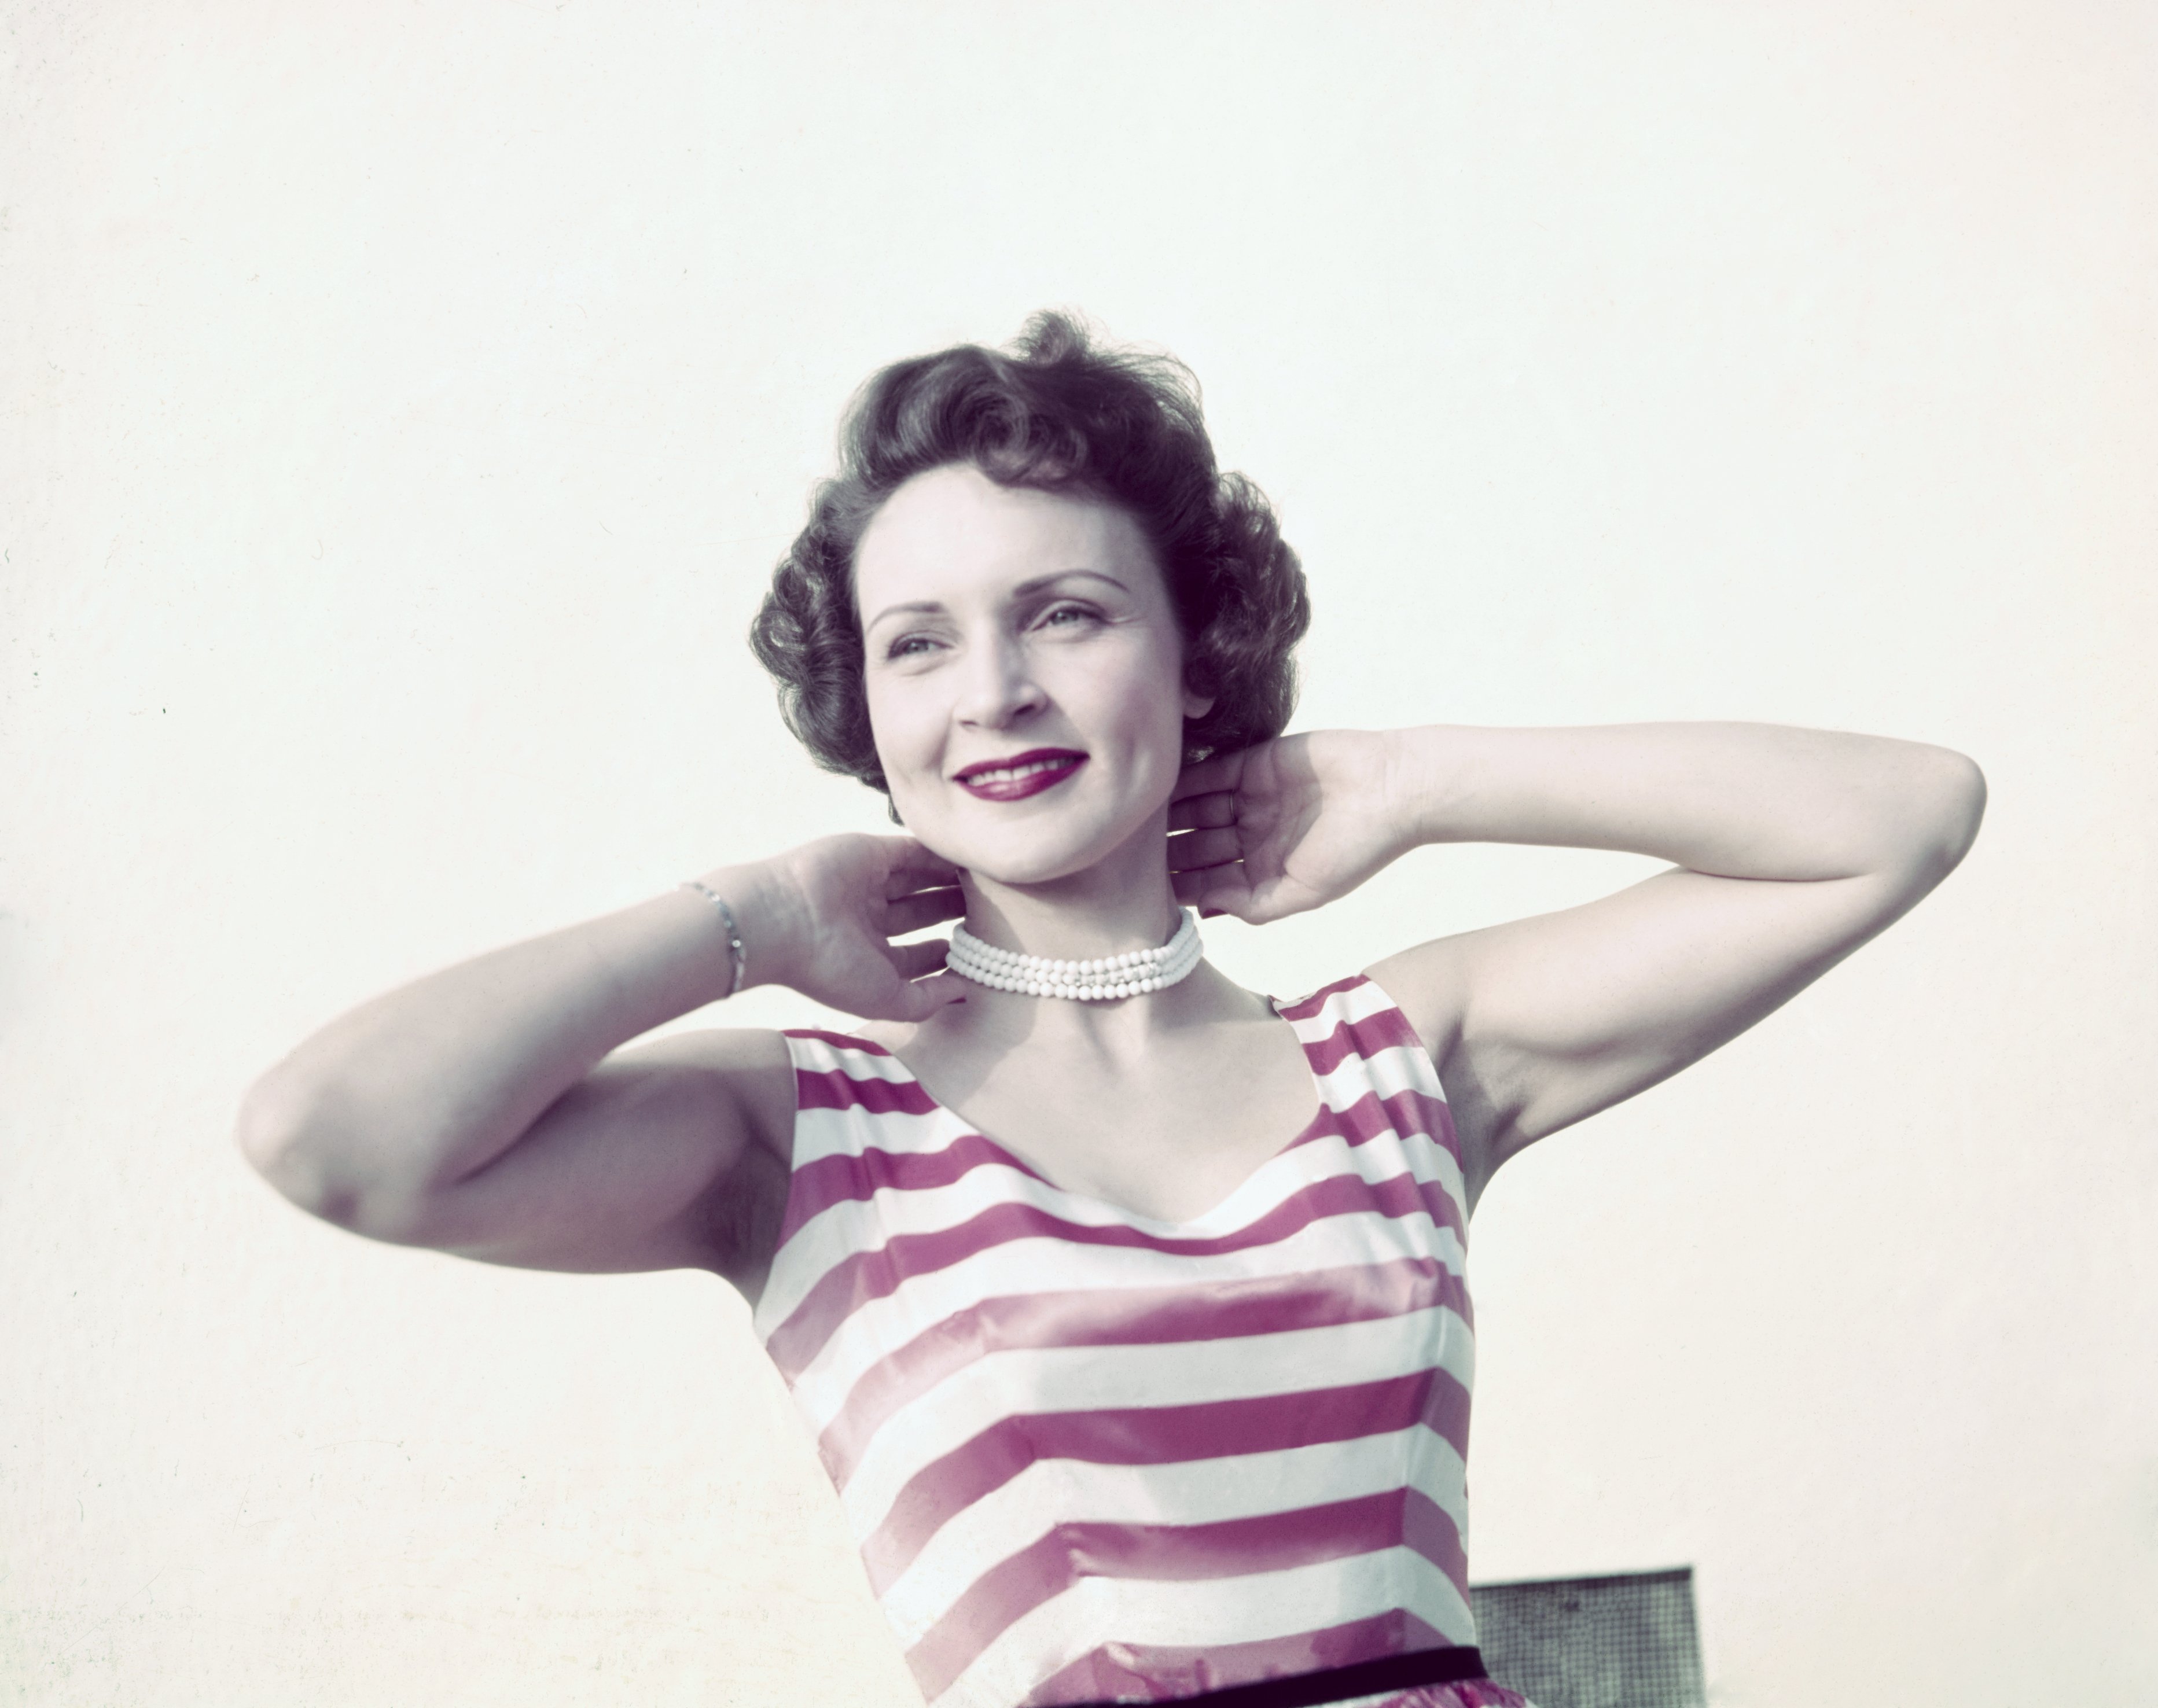 Betty White photographed in 1954 | Source: Getty Images